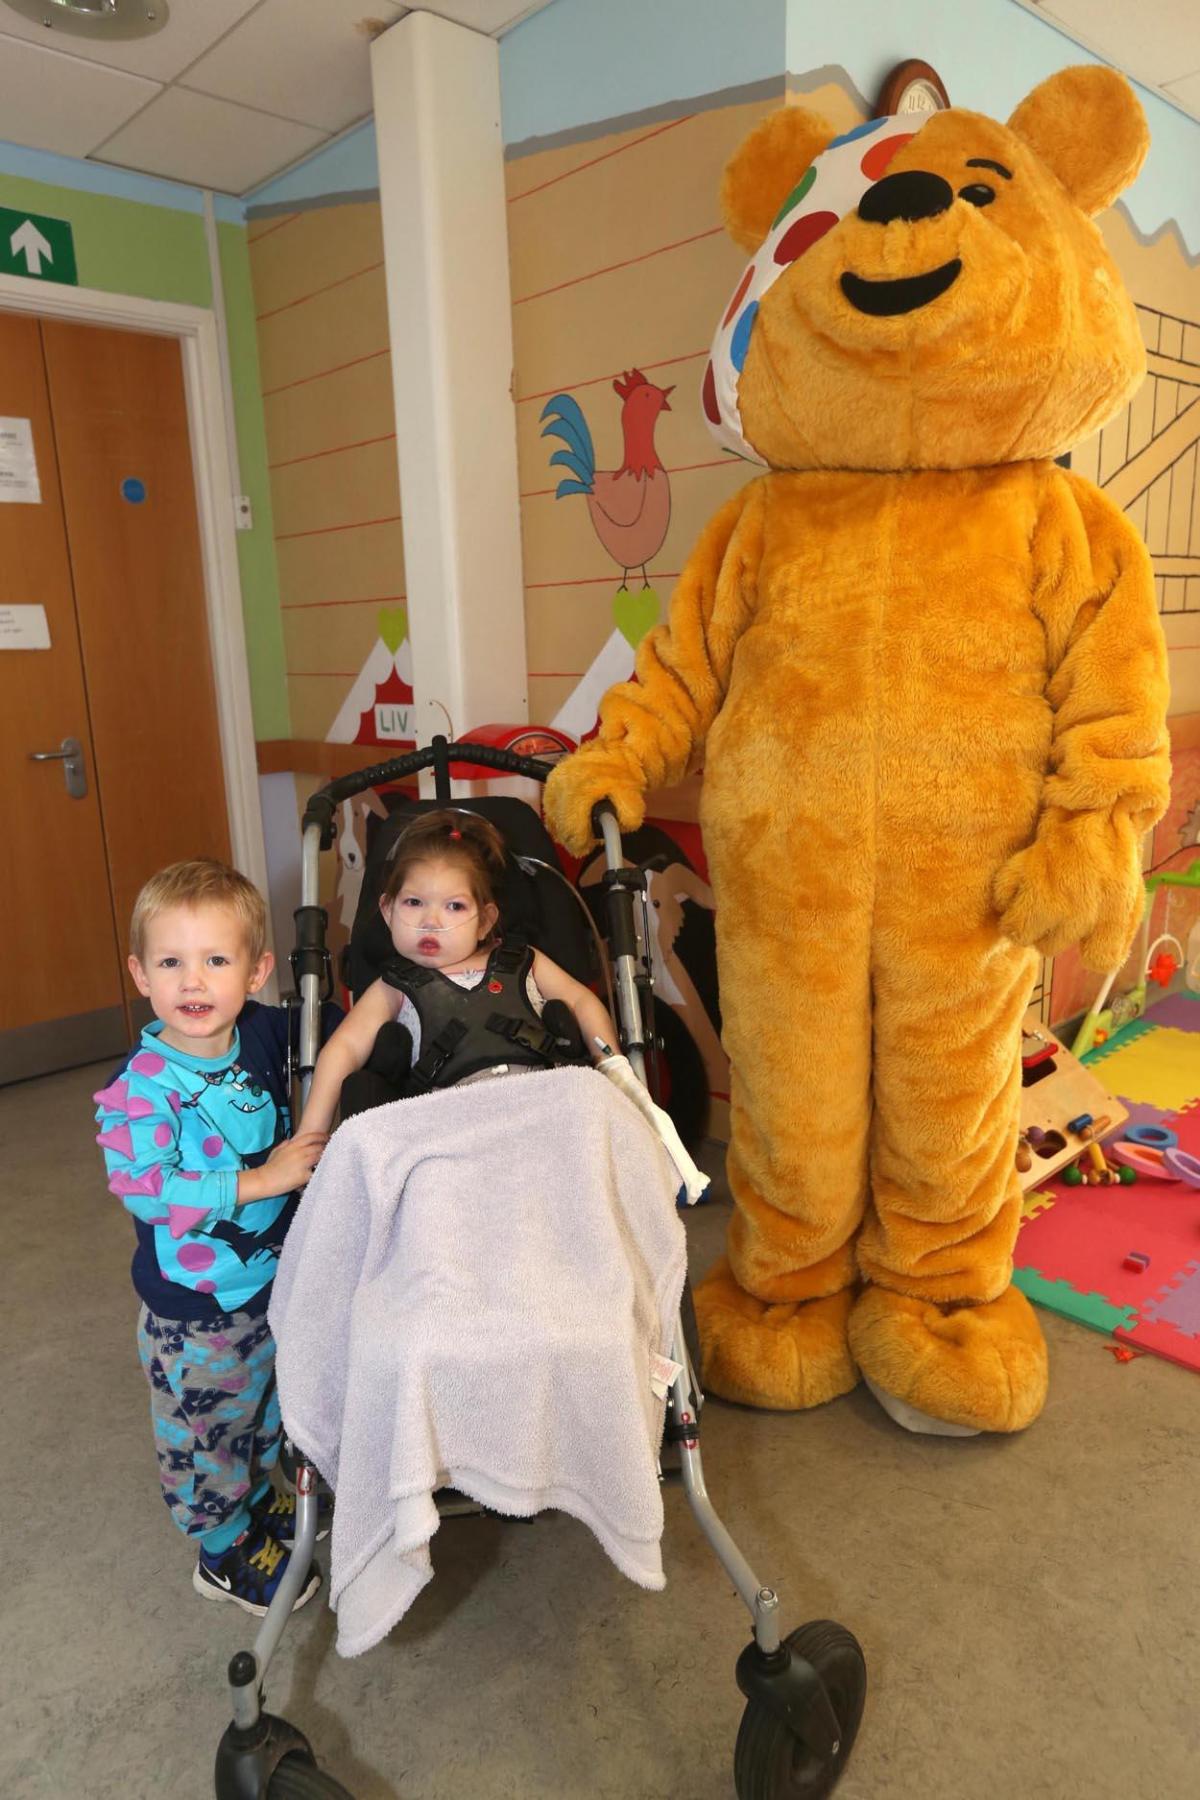 Pudsey Bear visits youngsters at Poole Hospital. Pictures by Jon Beal, Bournemouth Daily Echo. 